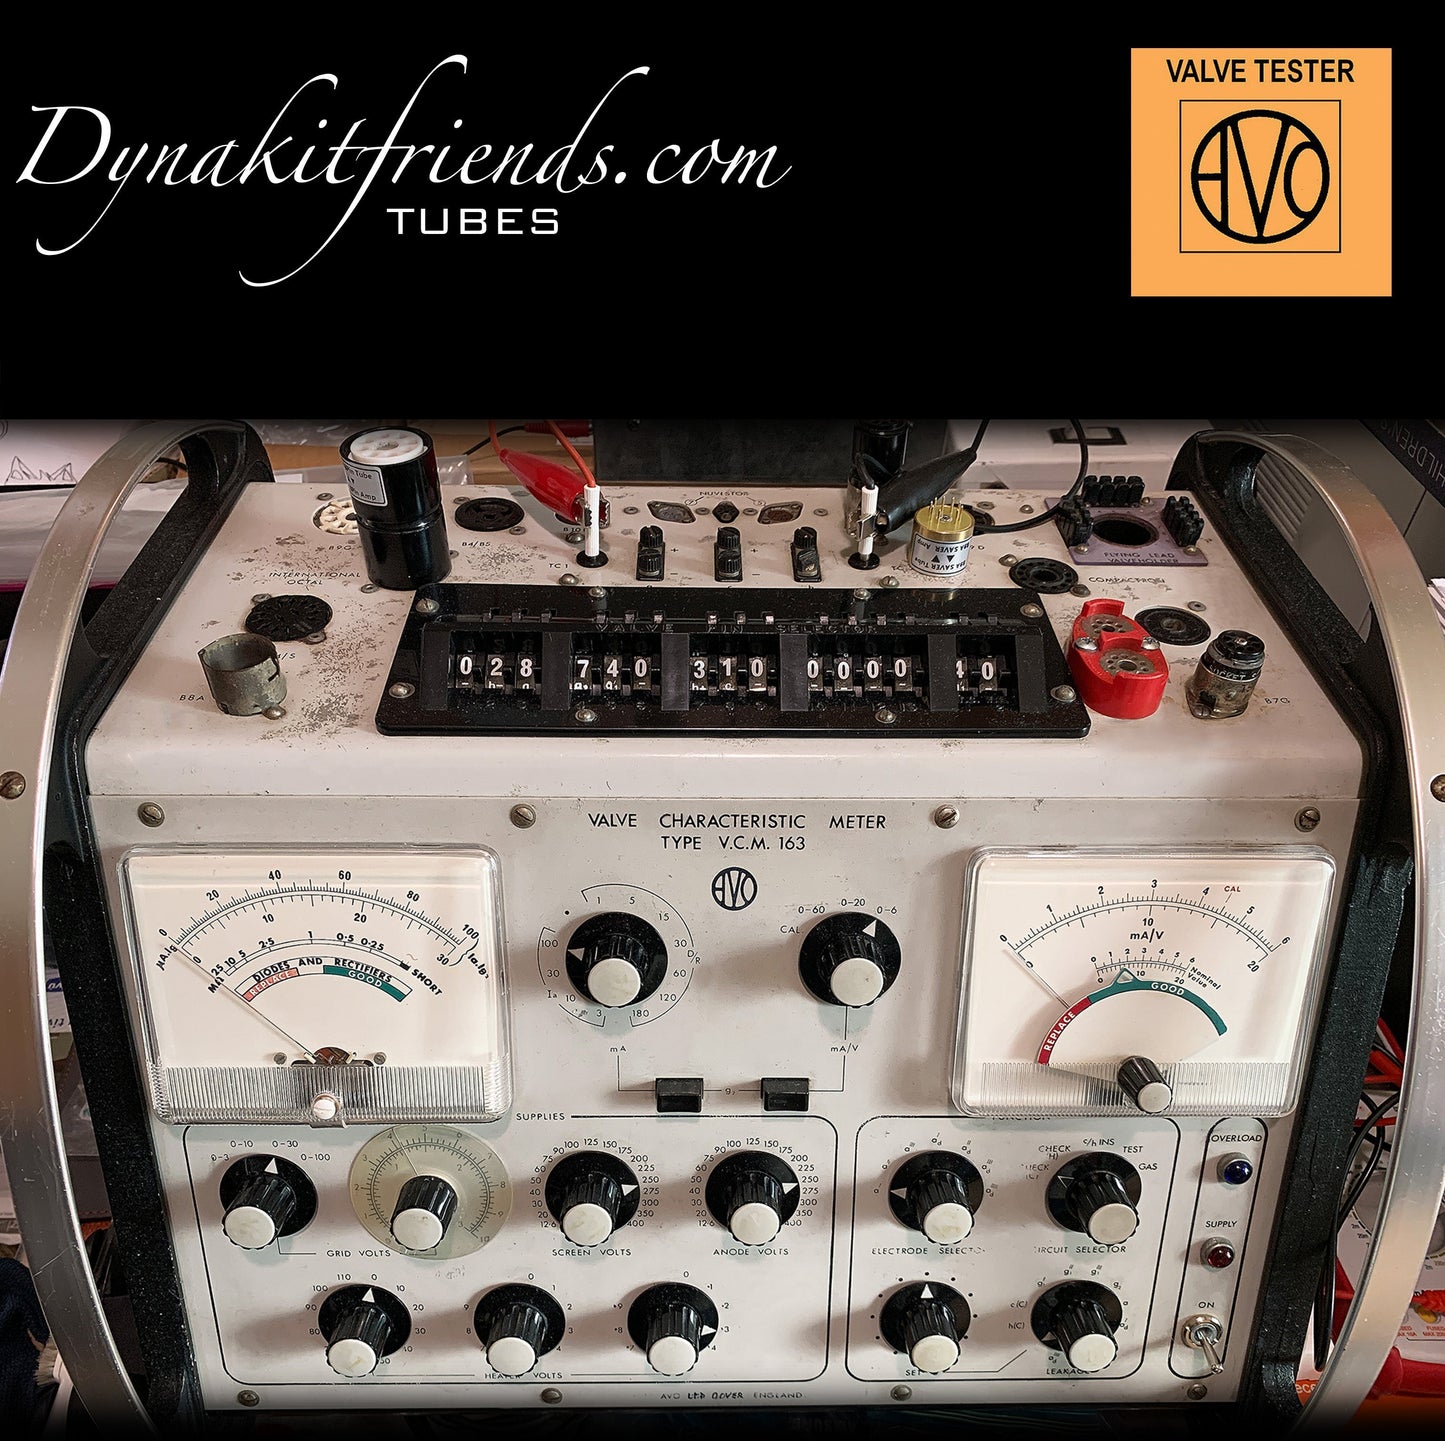 6U8 ( ECF82 ) Telefunken <> Diamond bottom Same Codes Gray Plates Halo Getter Matched Tubes Made in Germany